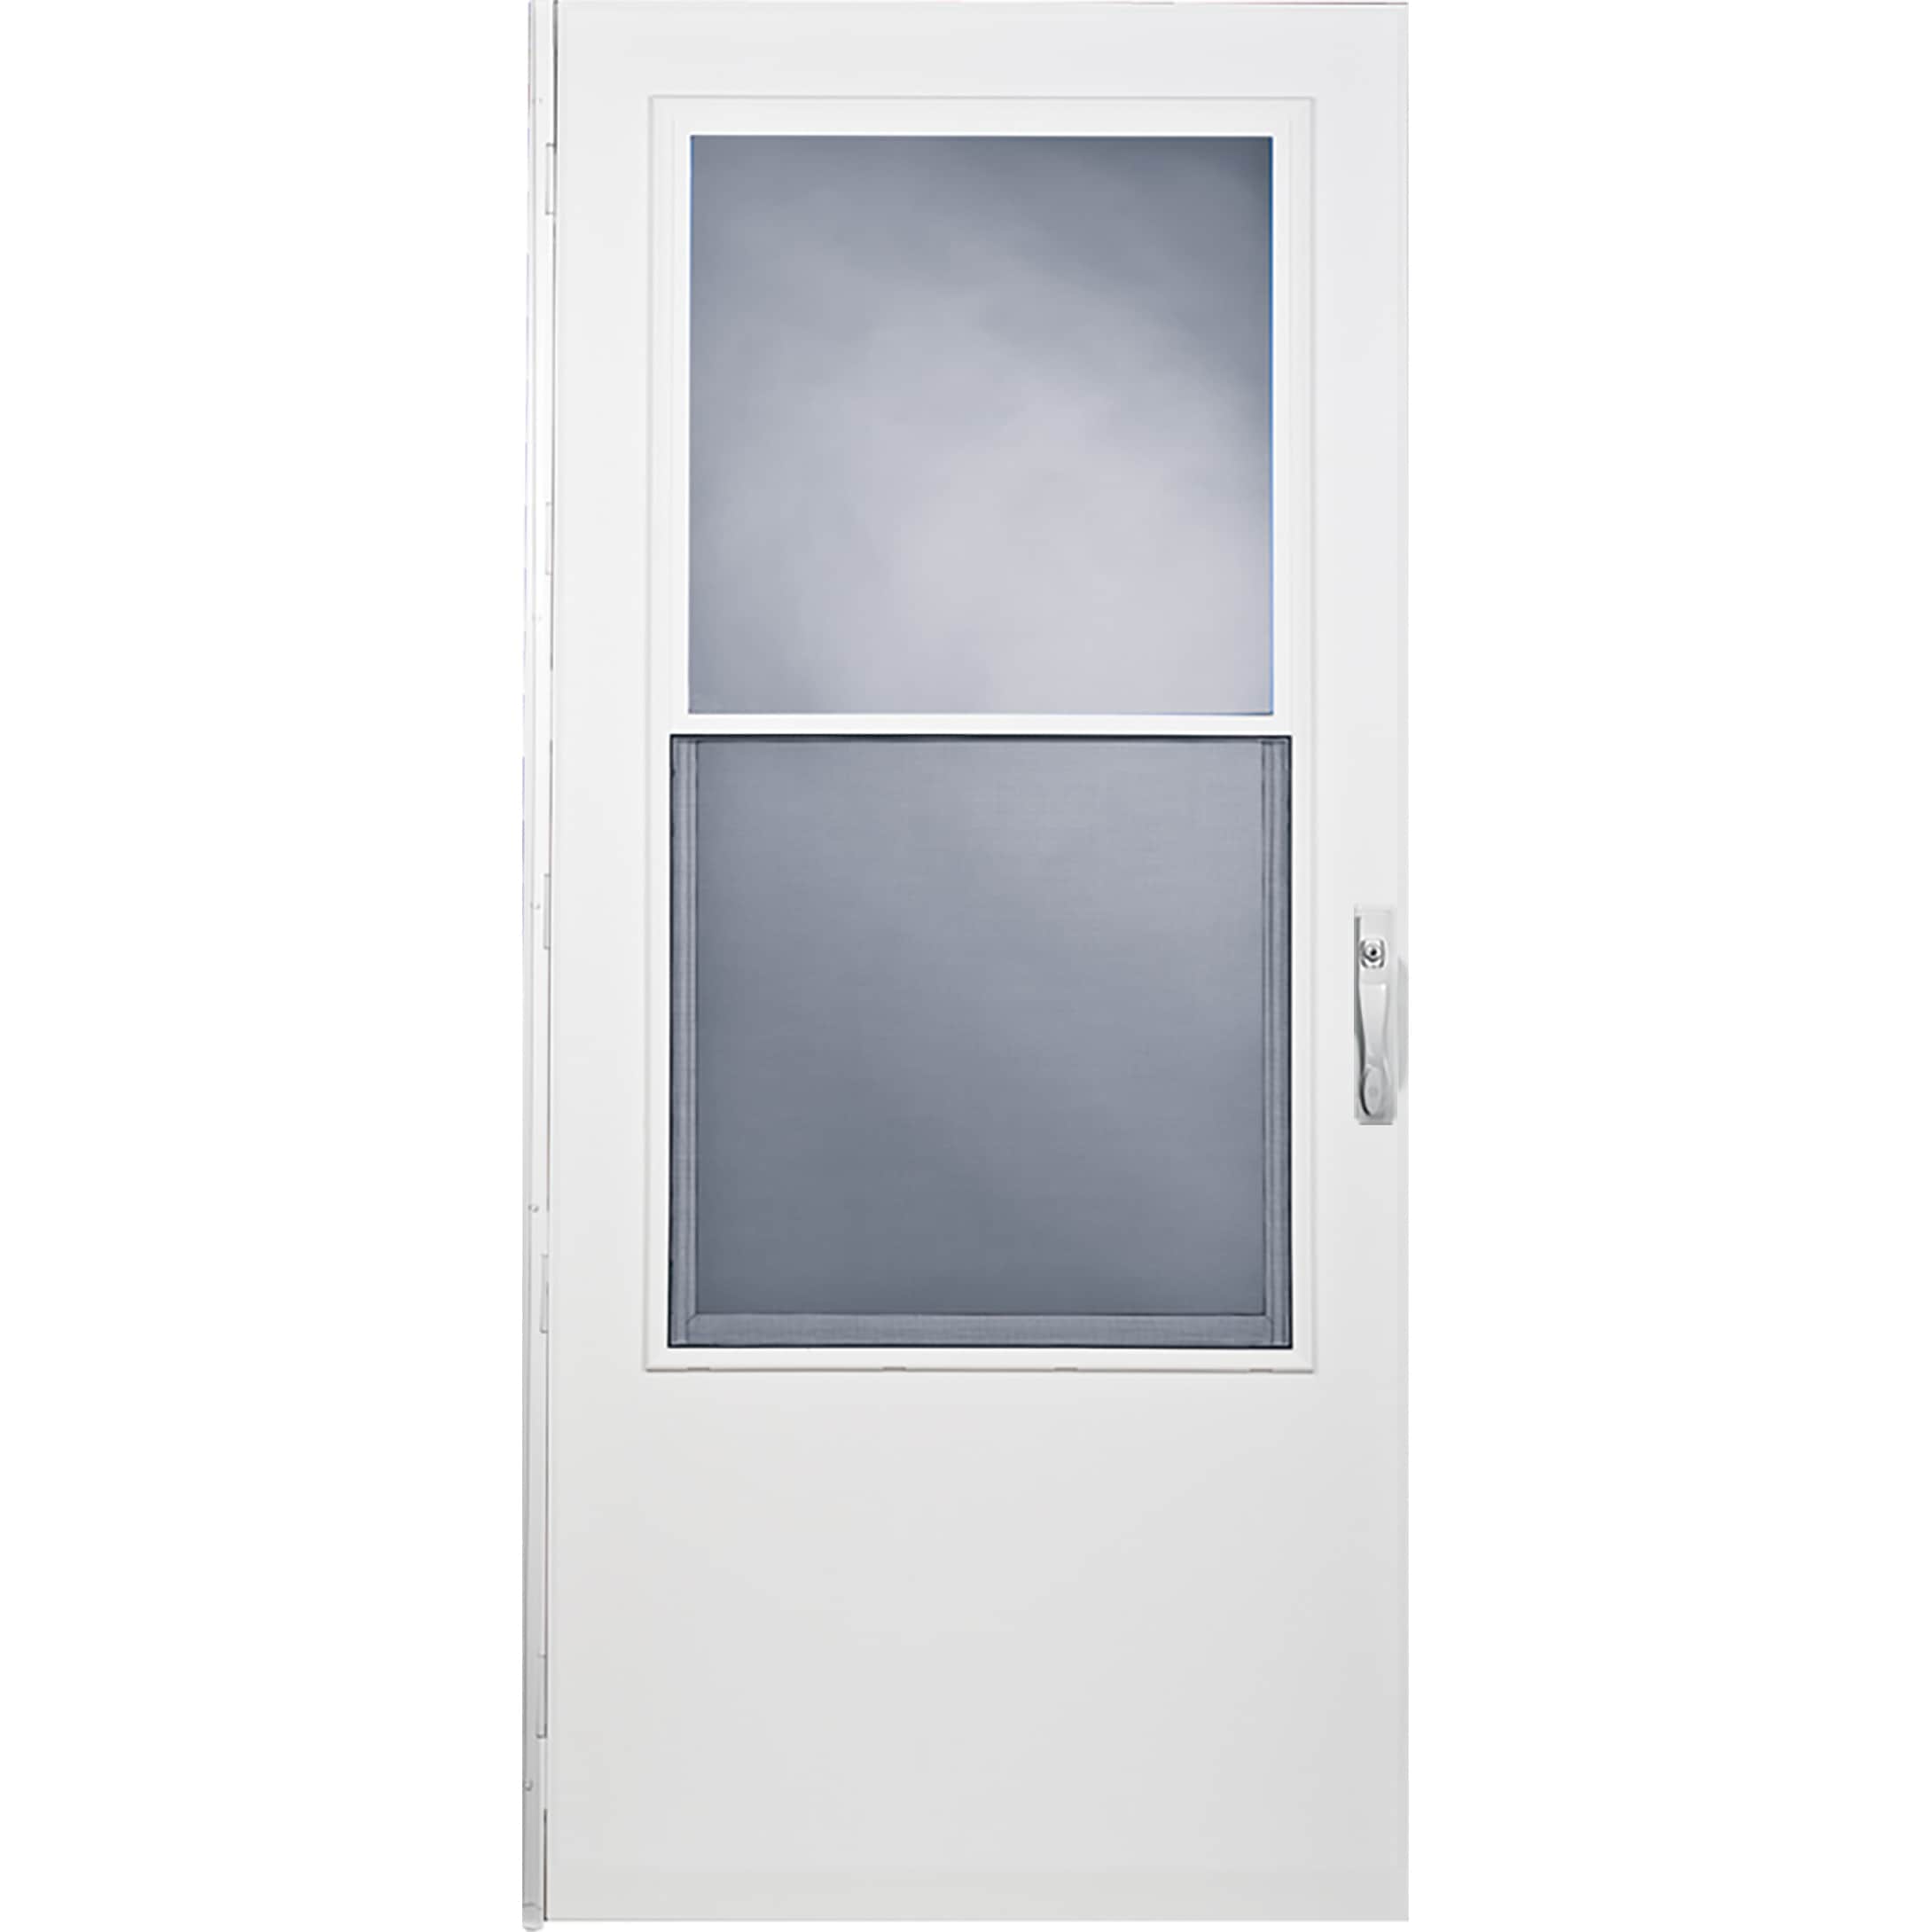 West Point 32-in x 78-in White Mid-view Self-storing Wood Core Storm Door with White Handle | - LARSON 37098316